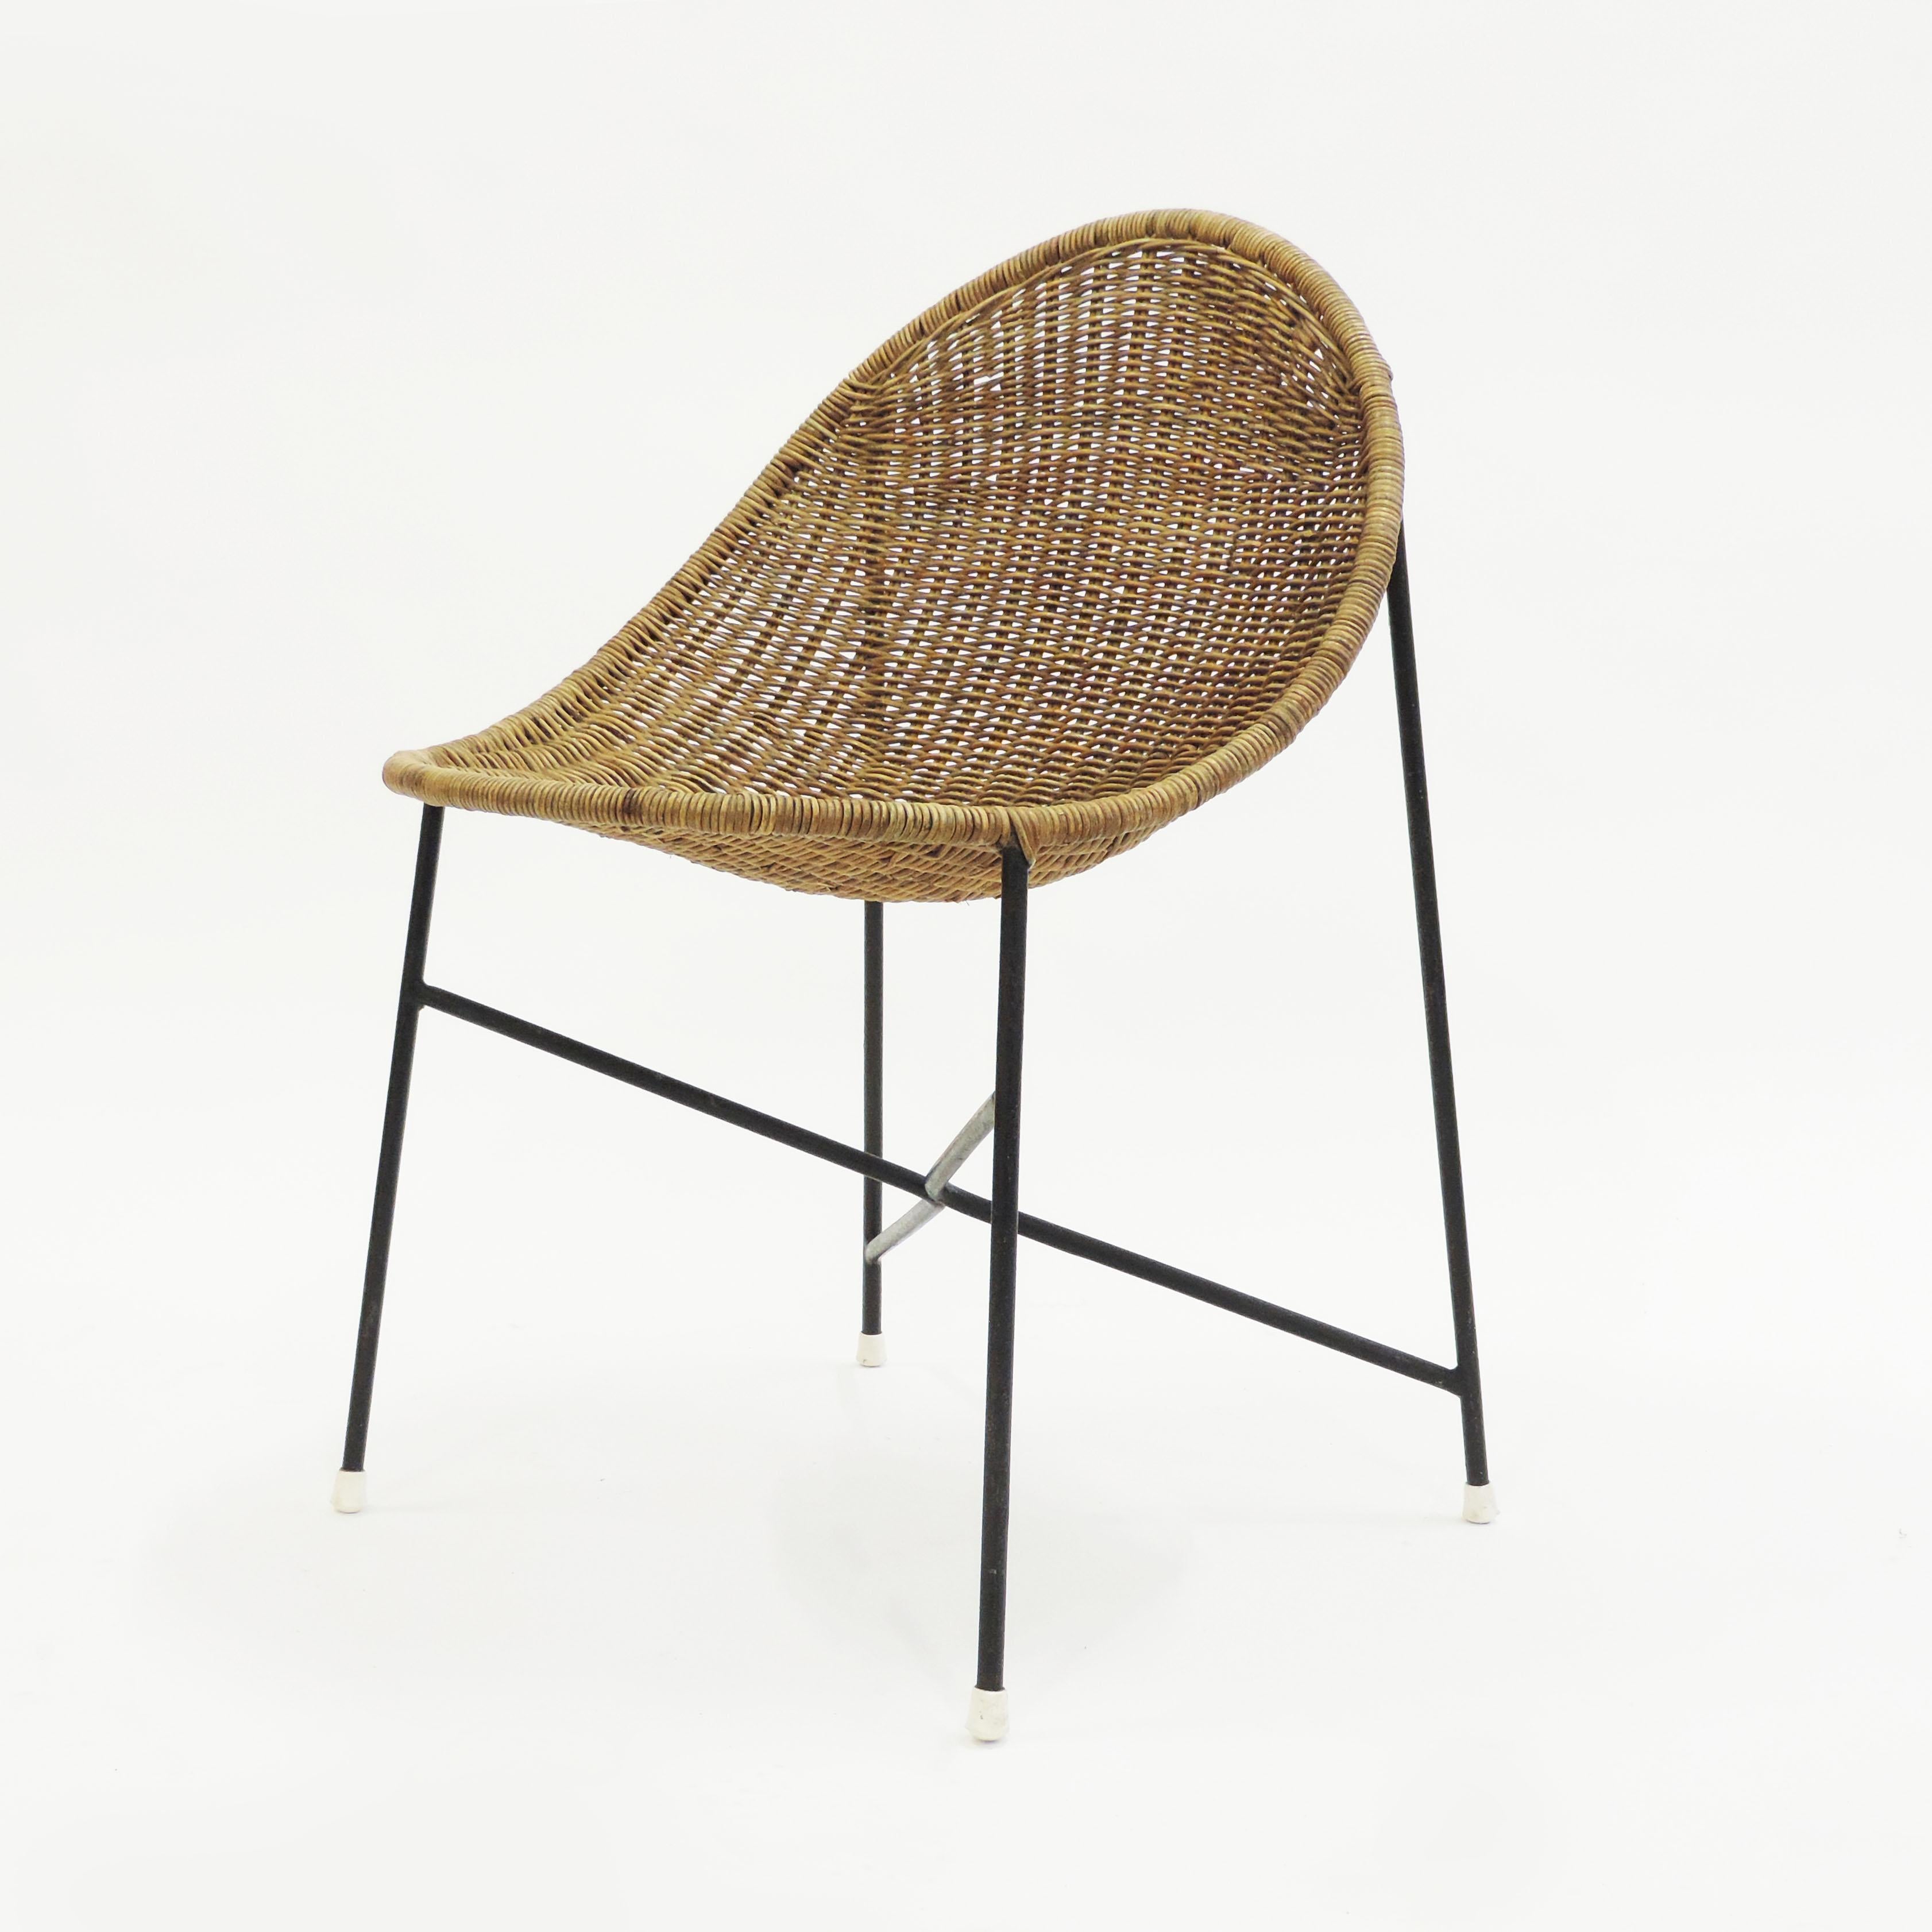 Mid-Century Modern French duo Georges and Hermine Laurent Wicker and Metal Chair, 1950s For Sale